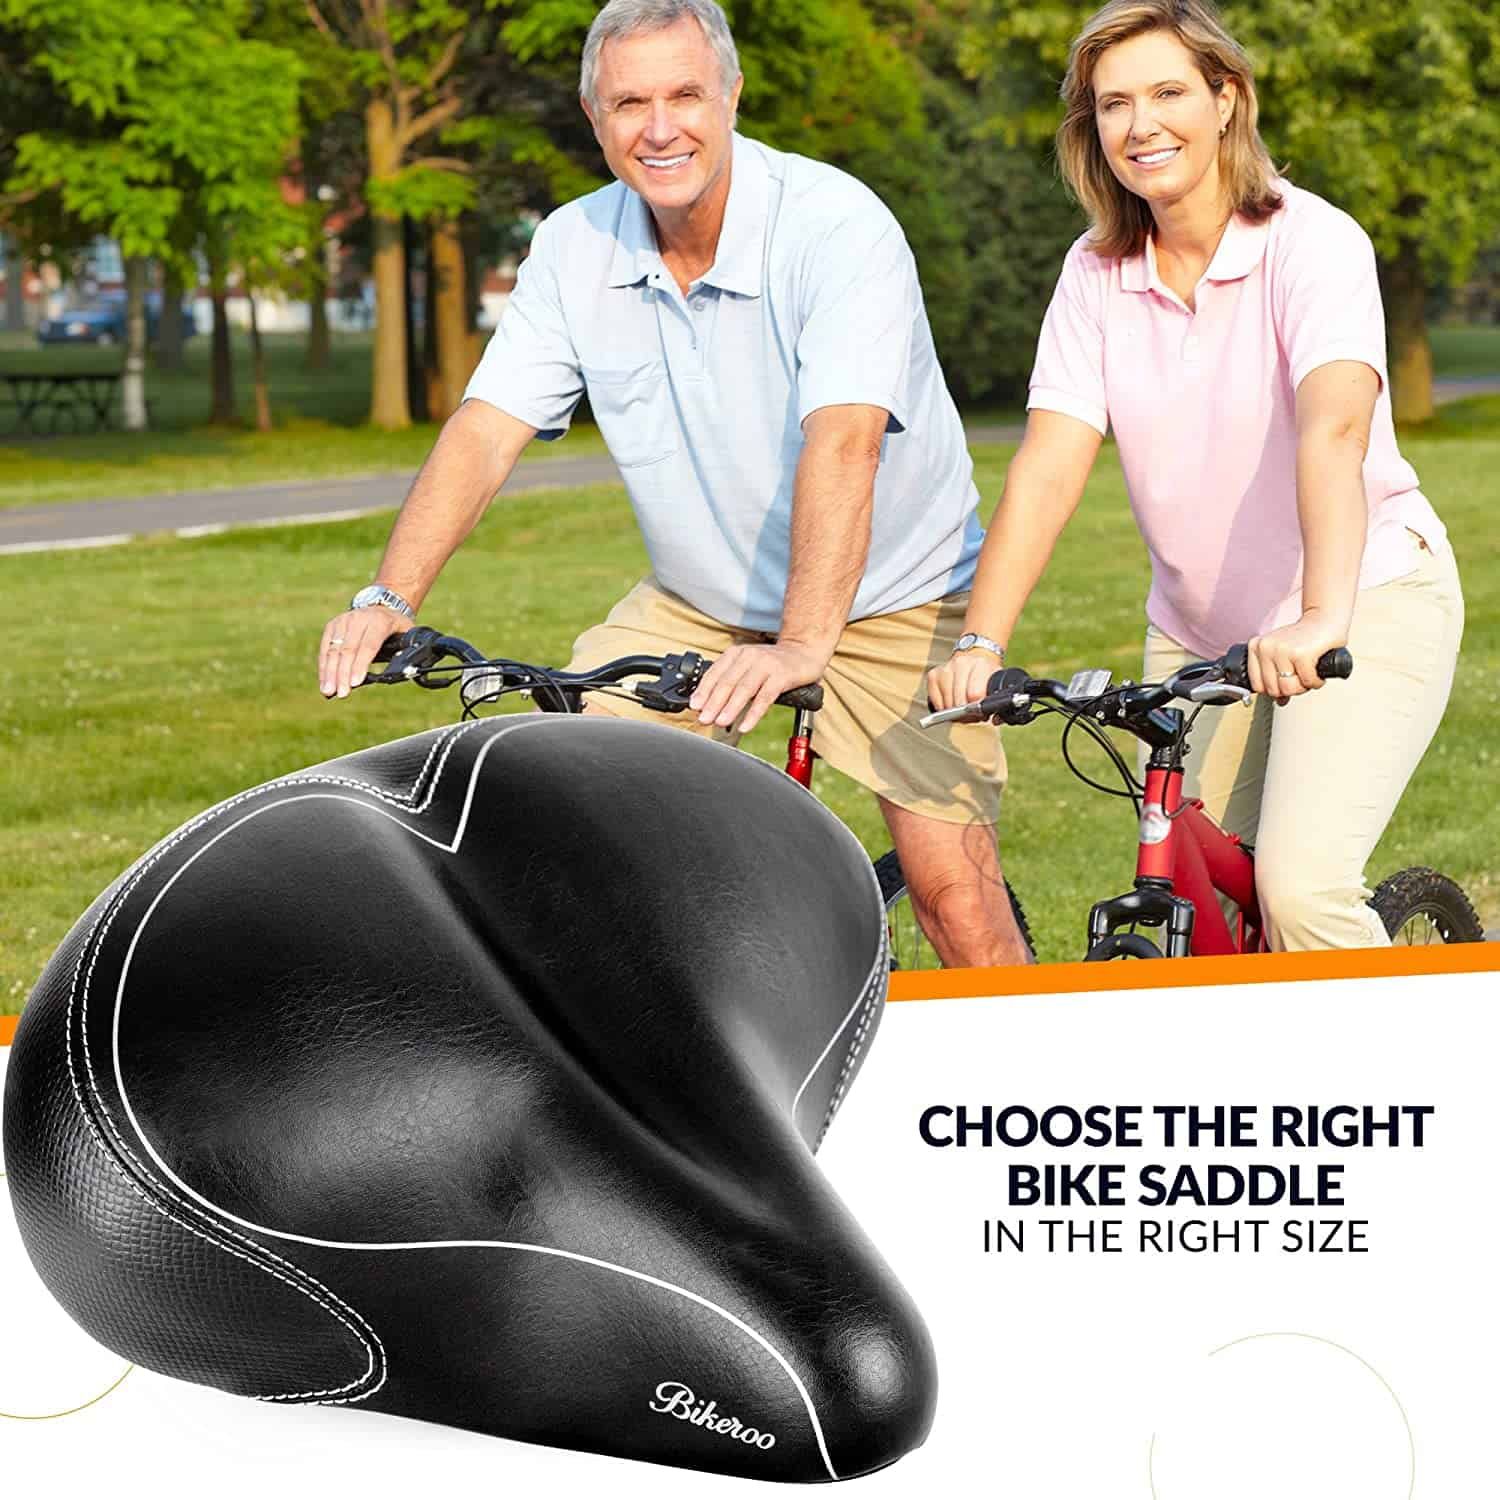 Purchasing a bike seat for overweight people